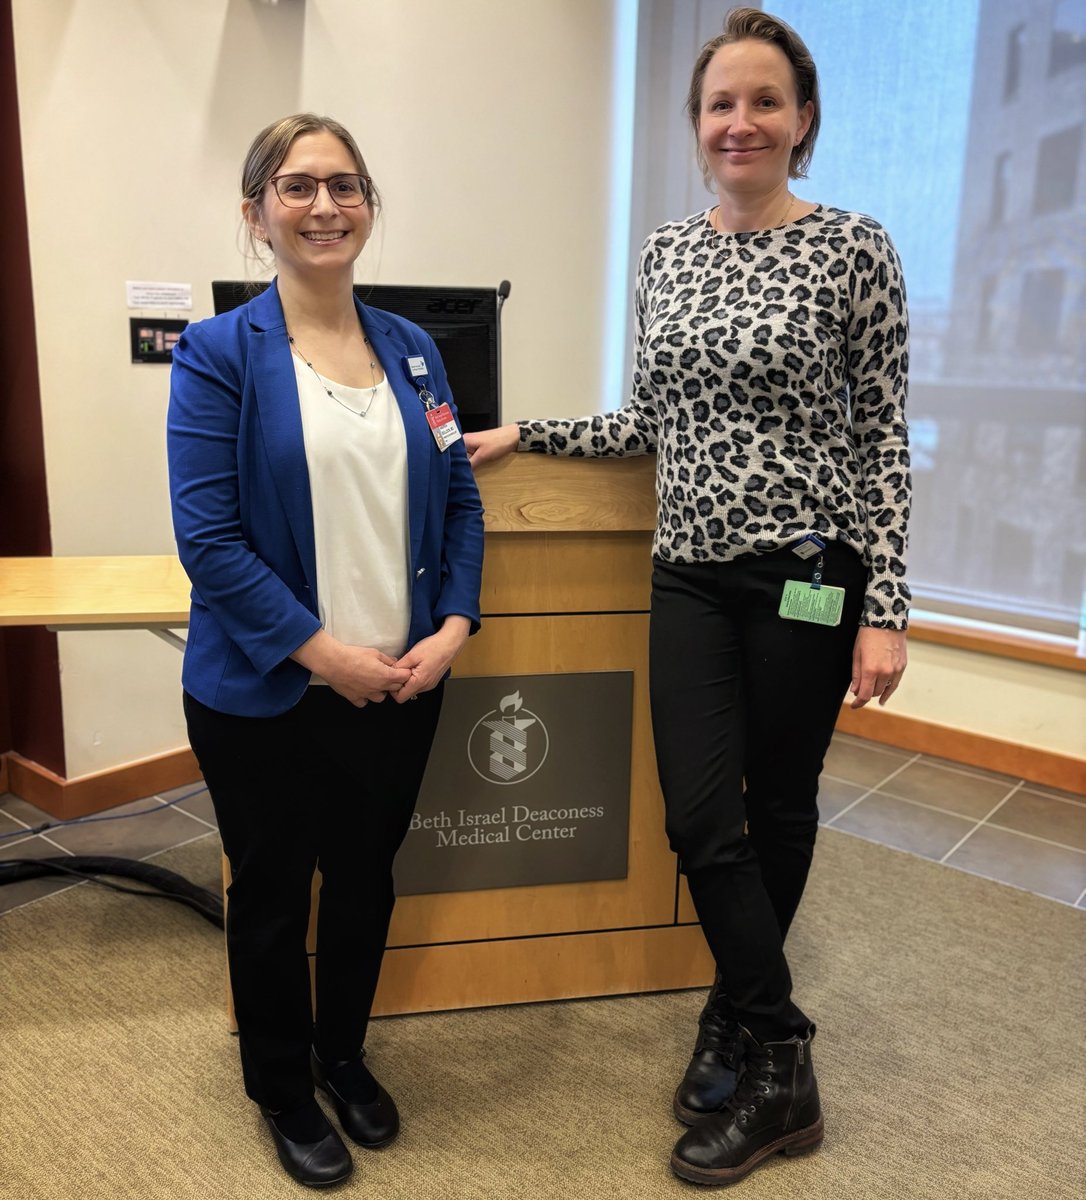 Live from our Cancer Research Institute Seminar Series: Andrea Bullock, MD, MPH @BIDMC_Medicine + hosted by @tarumurmur “Turning Up the Heat: Expanding ImmunoOncology Responses in Cold #GI Malignancies” 🔥 #MedTwitter #CancerResearch